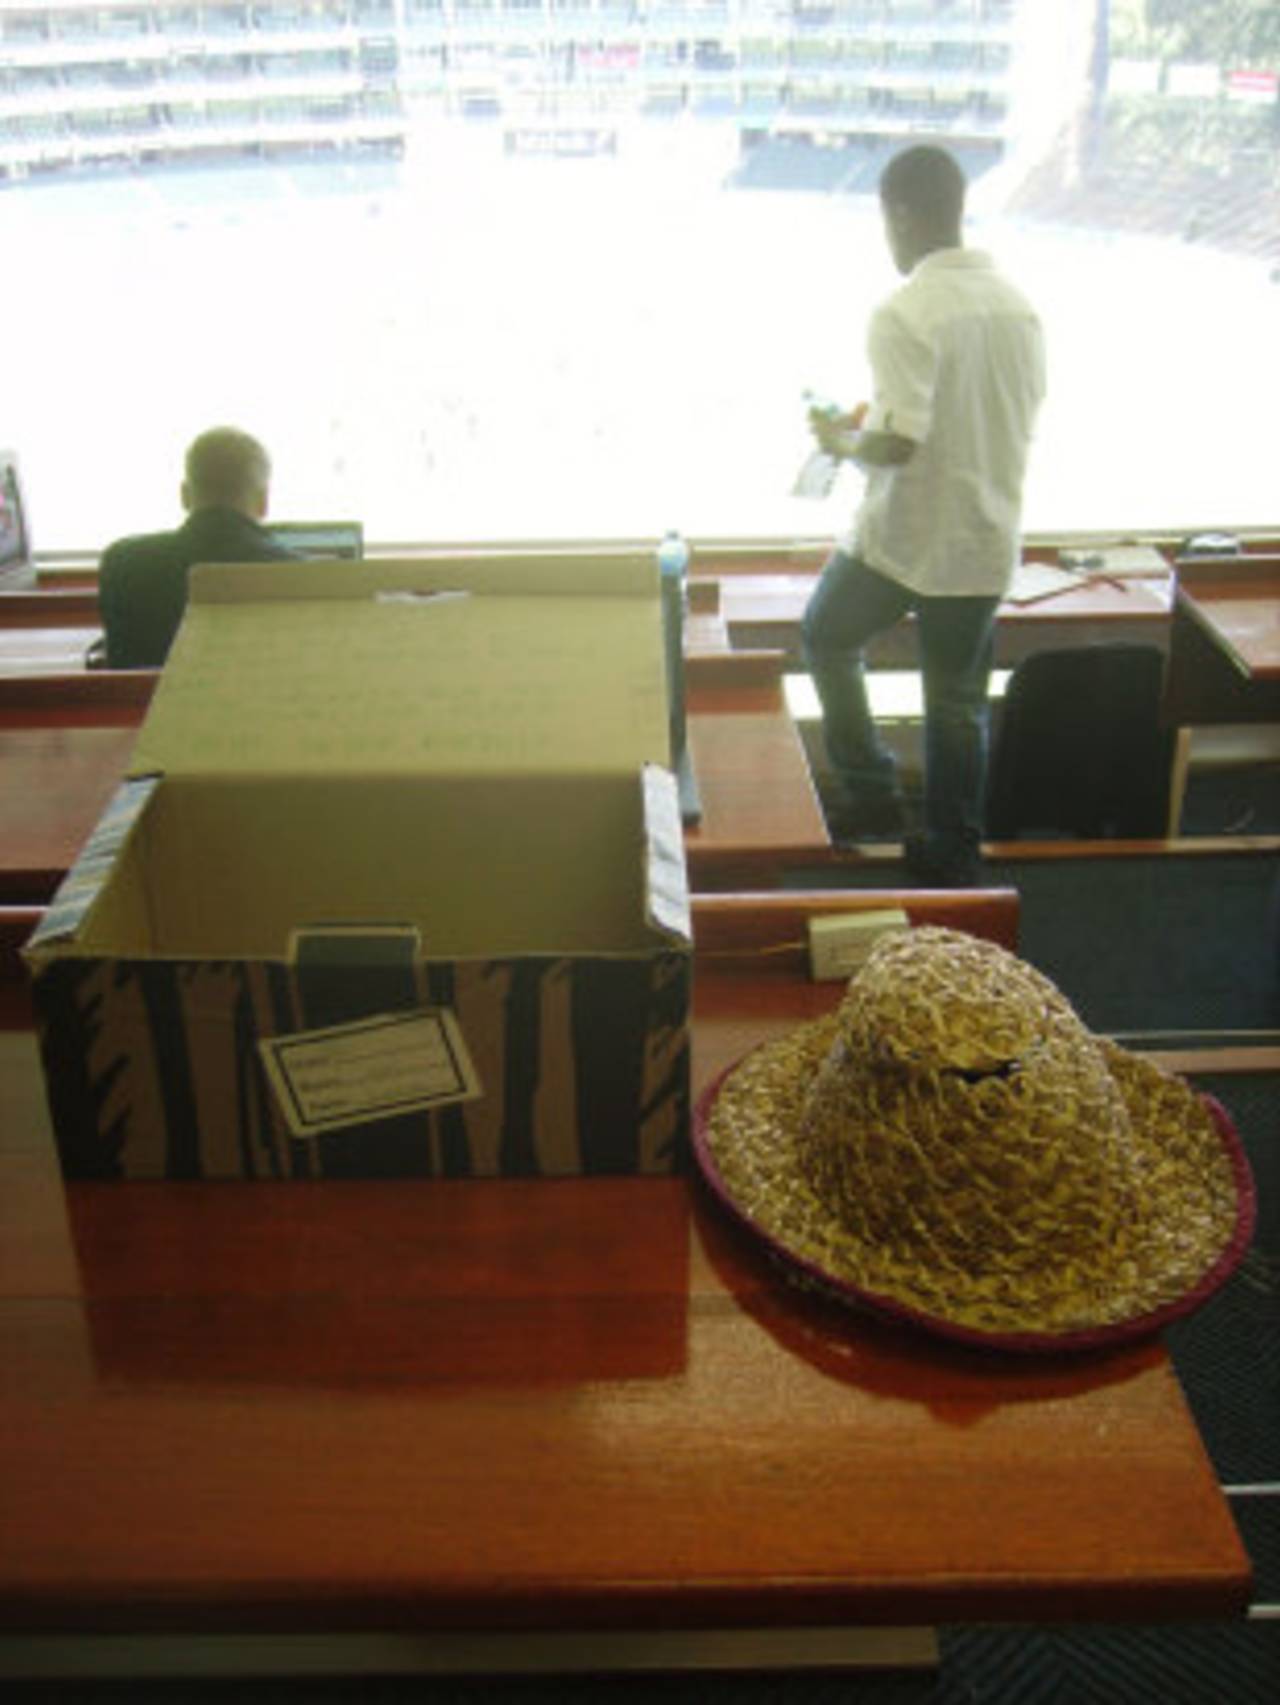 Peter Roebuck's hat lies on a desk in the press box next to a note asking for donations to support the students he supported&nbsp;&nbsp;&bull;&nbsp;&nbsp;ESPNcricinfo Ltd